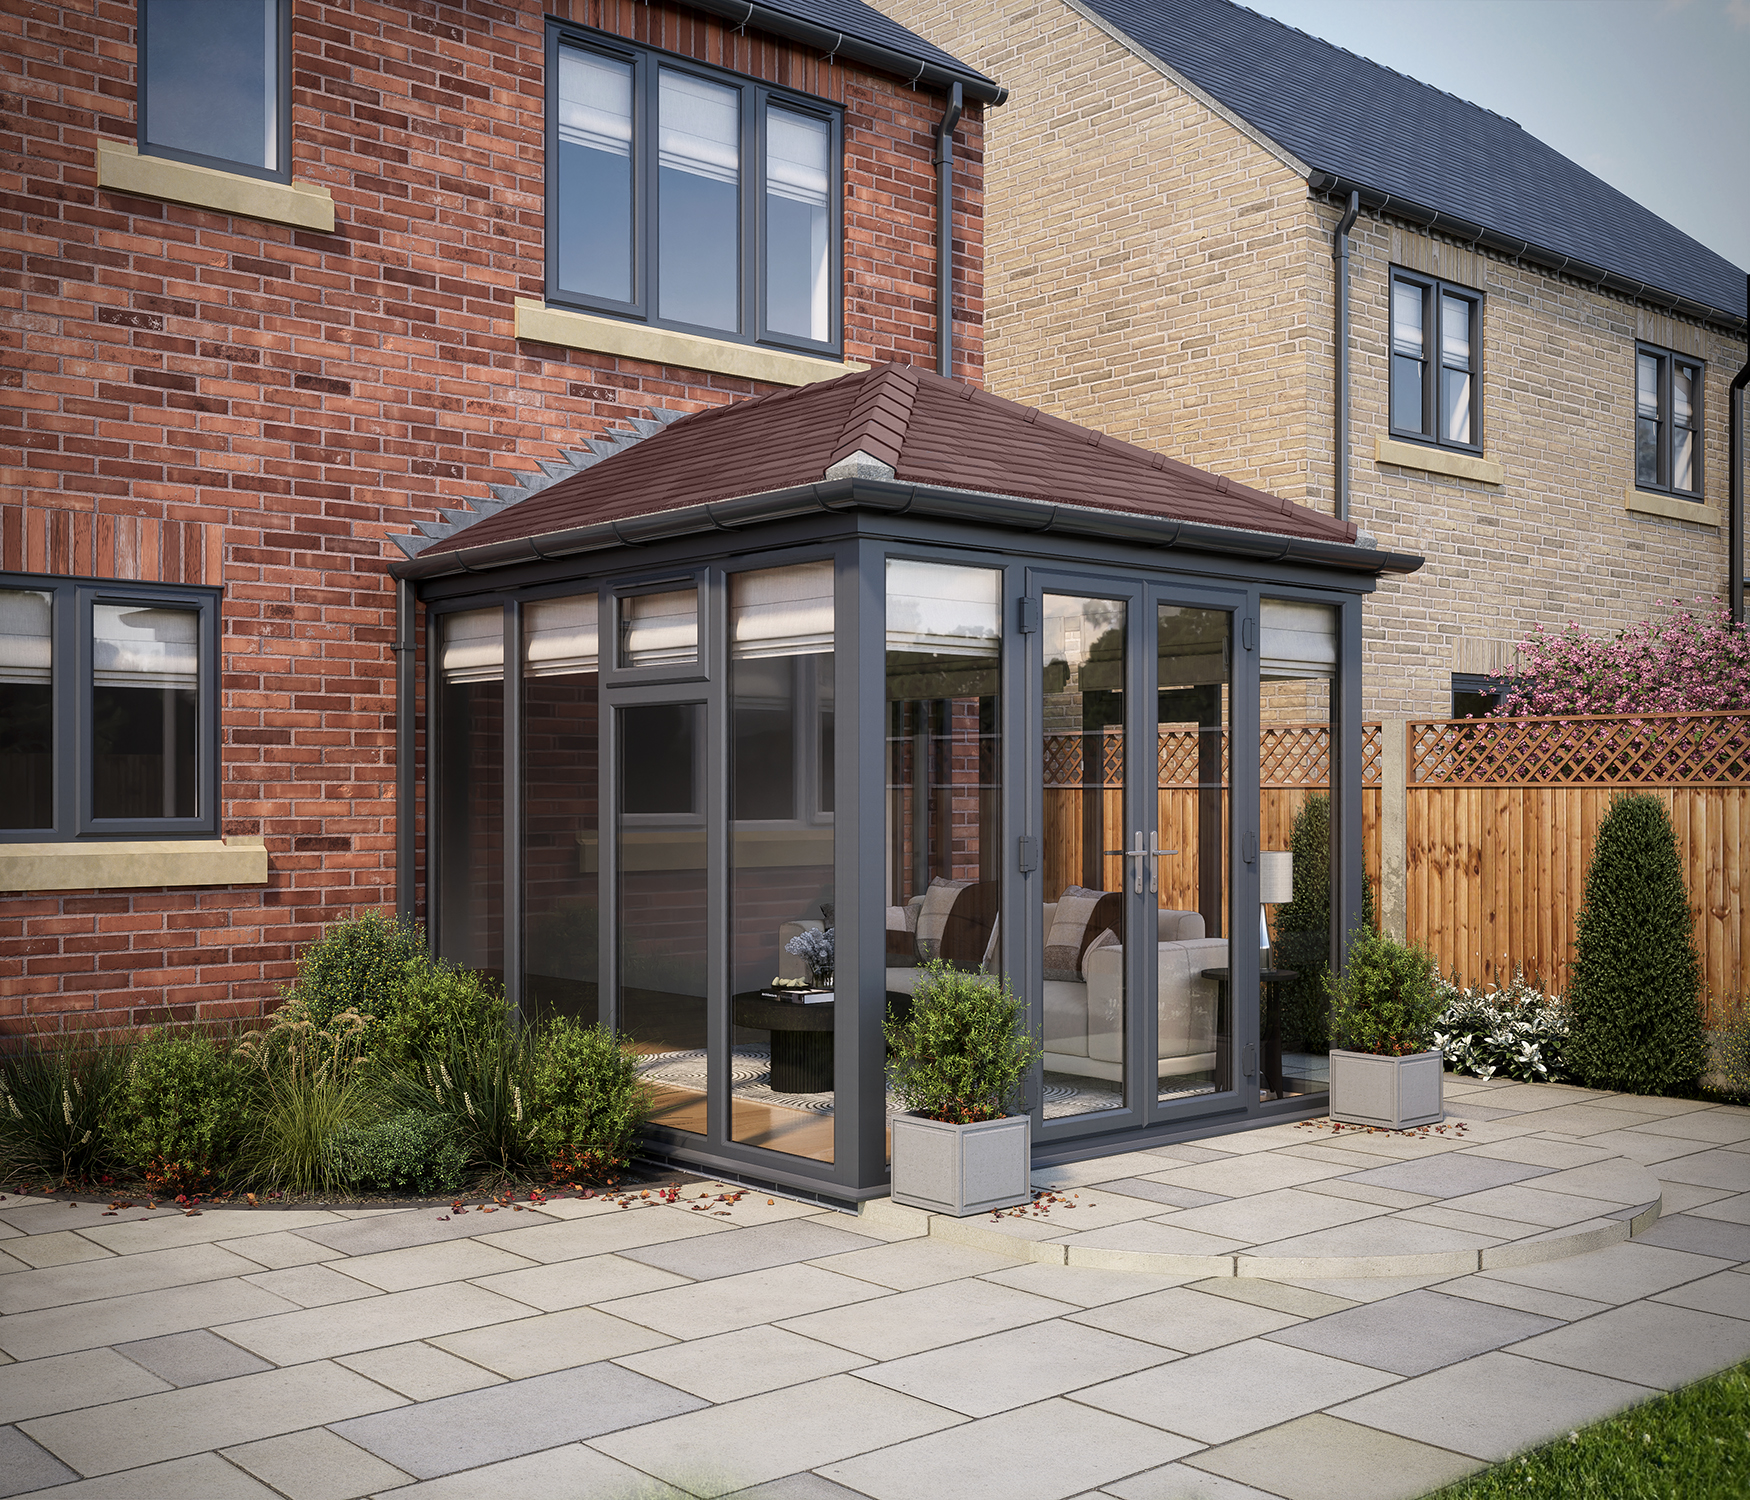 Image of SOLid Roof Full Height Edwardian Conservatory Grey Frames with Rustic Brown Tiles - 13 x 13ft